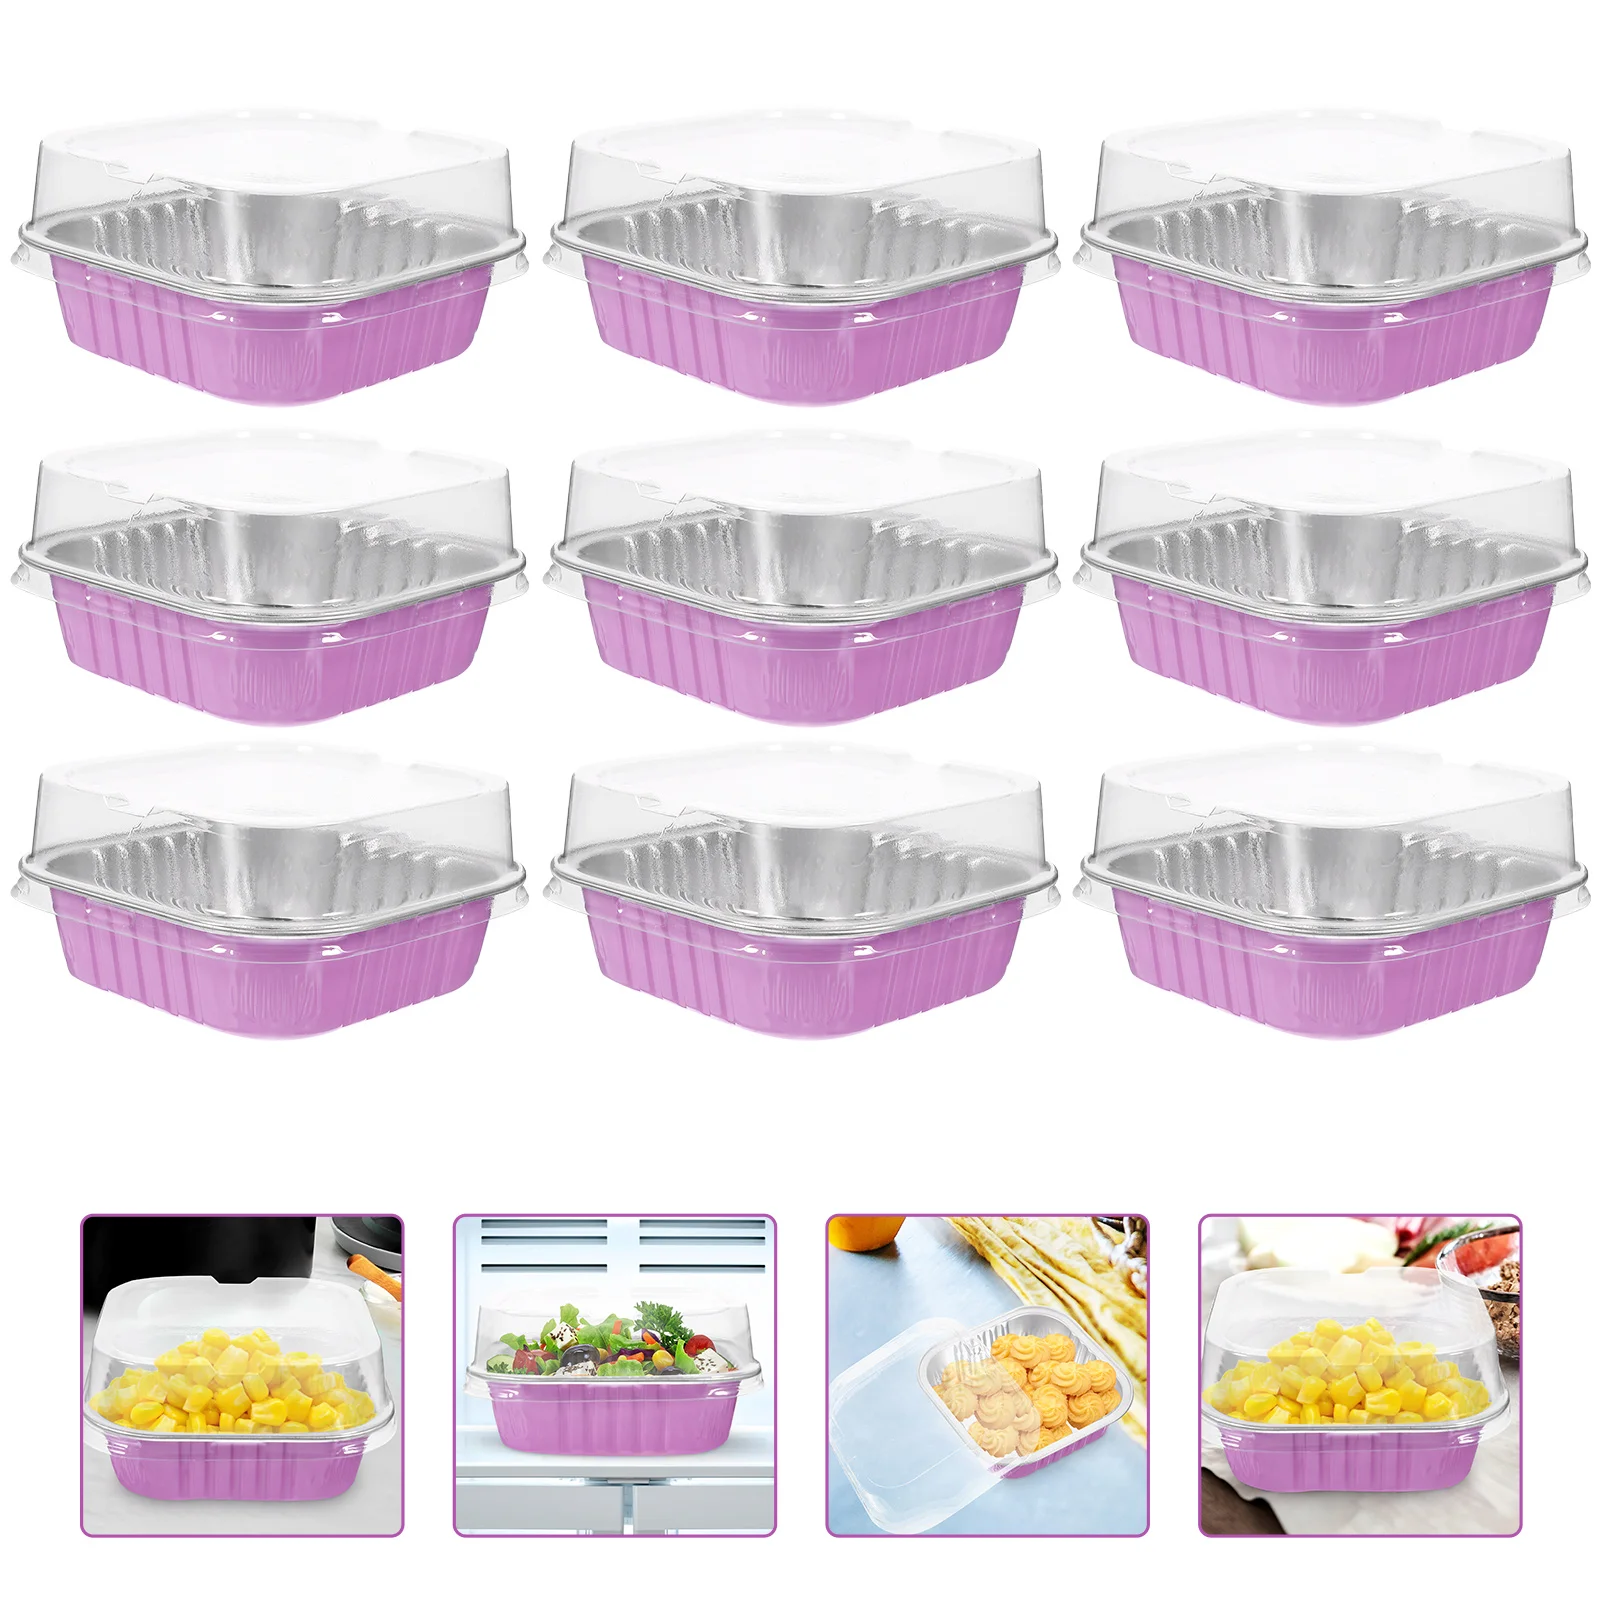 

20 Sets Aluminum Foil Cake Box Baking Container Muffin Wrapper Liners Food Pans Boxes Cupcake Holder